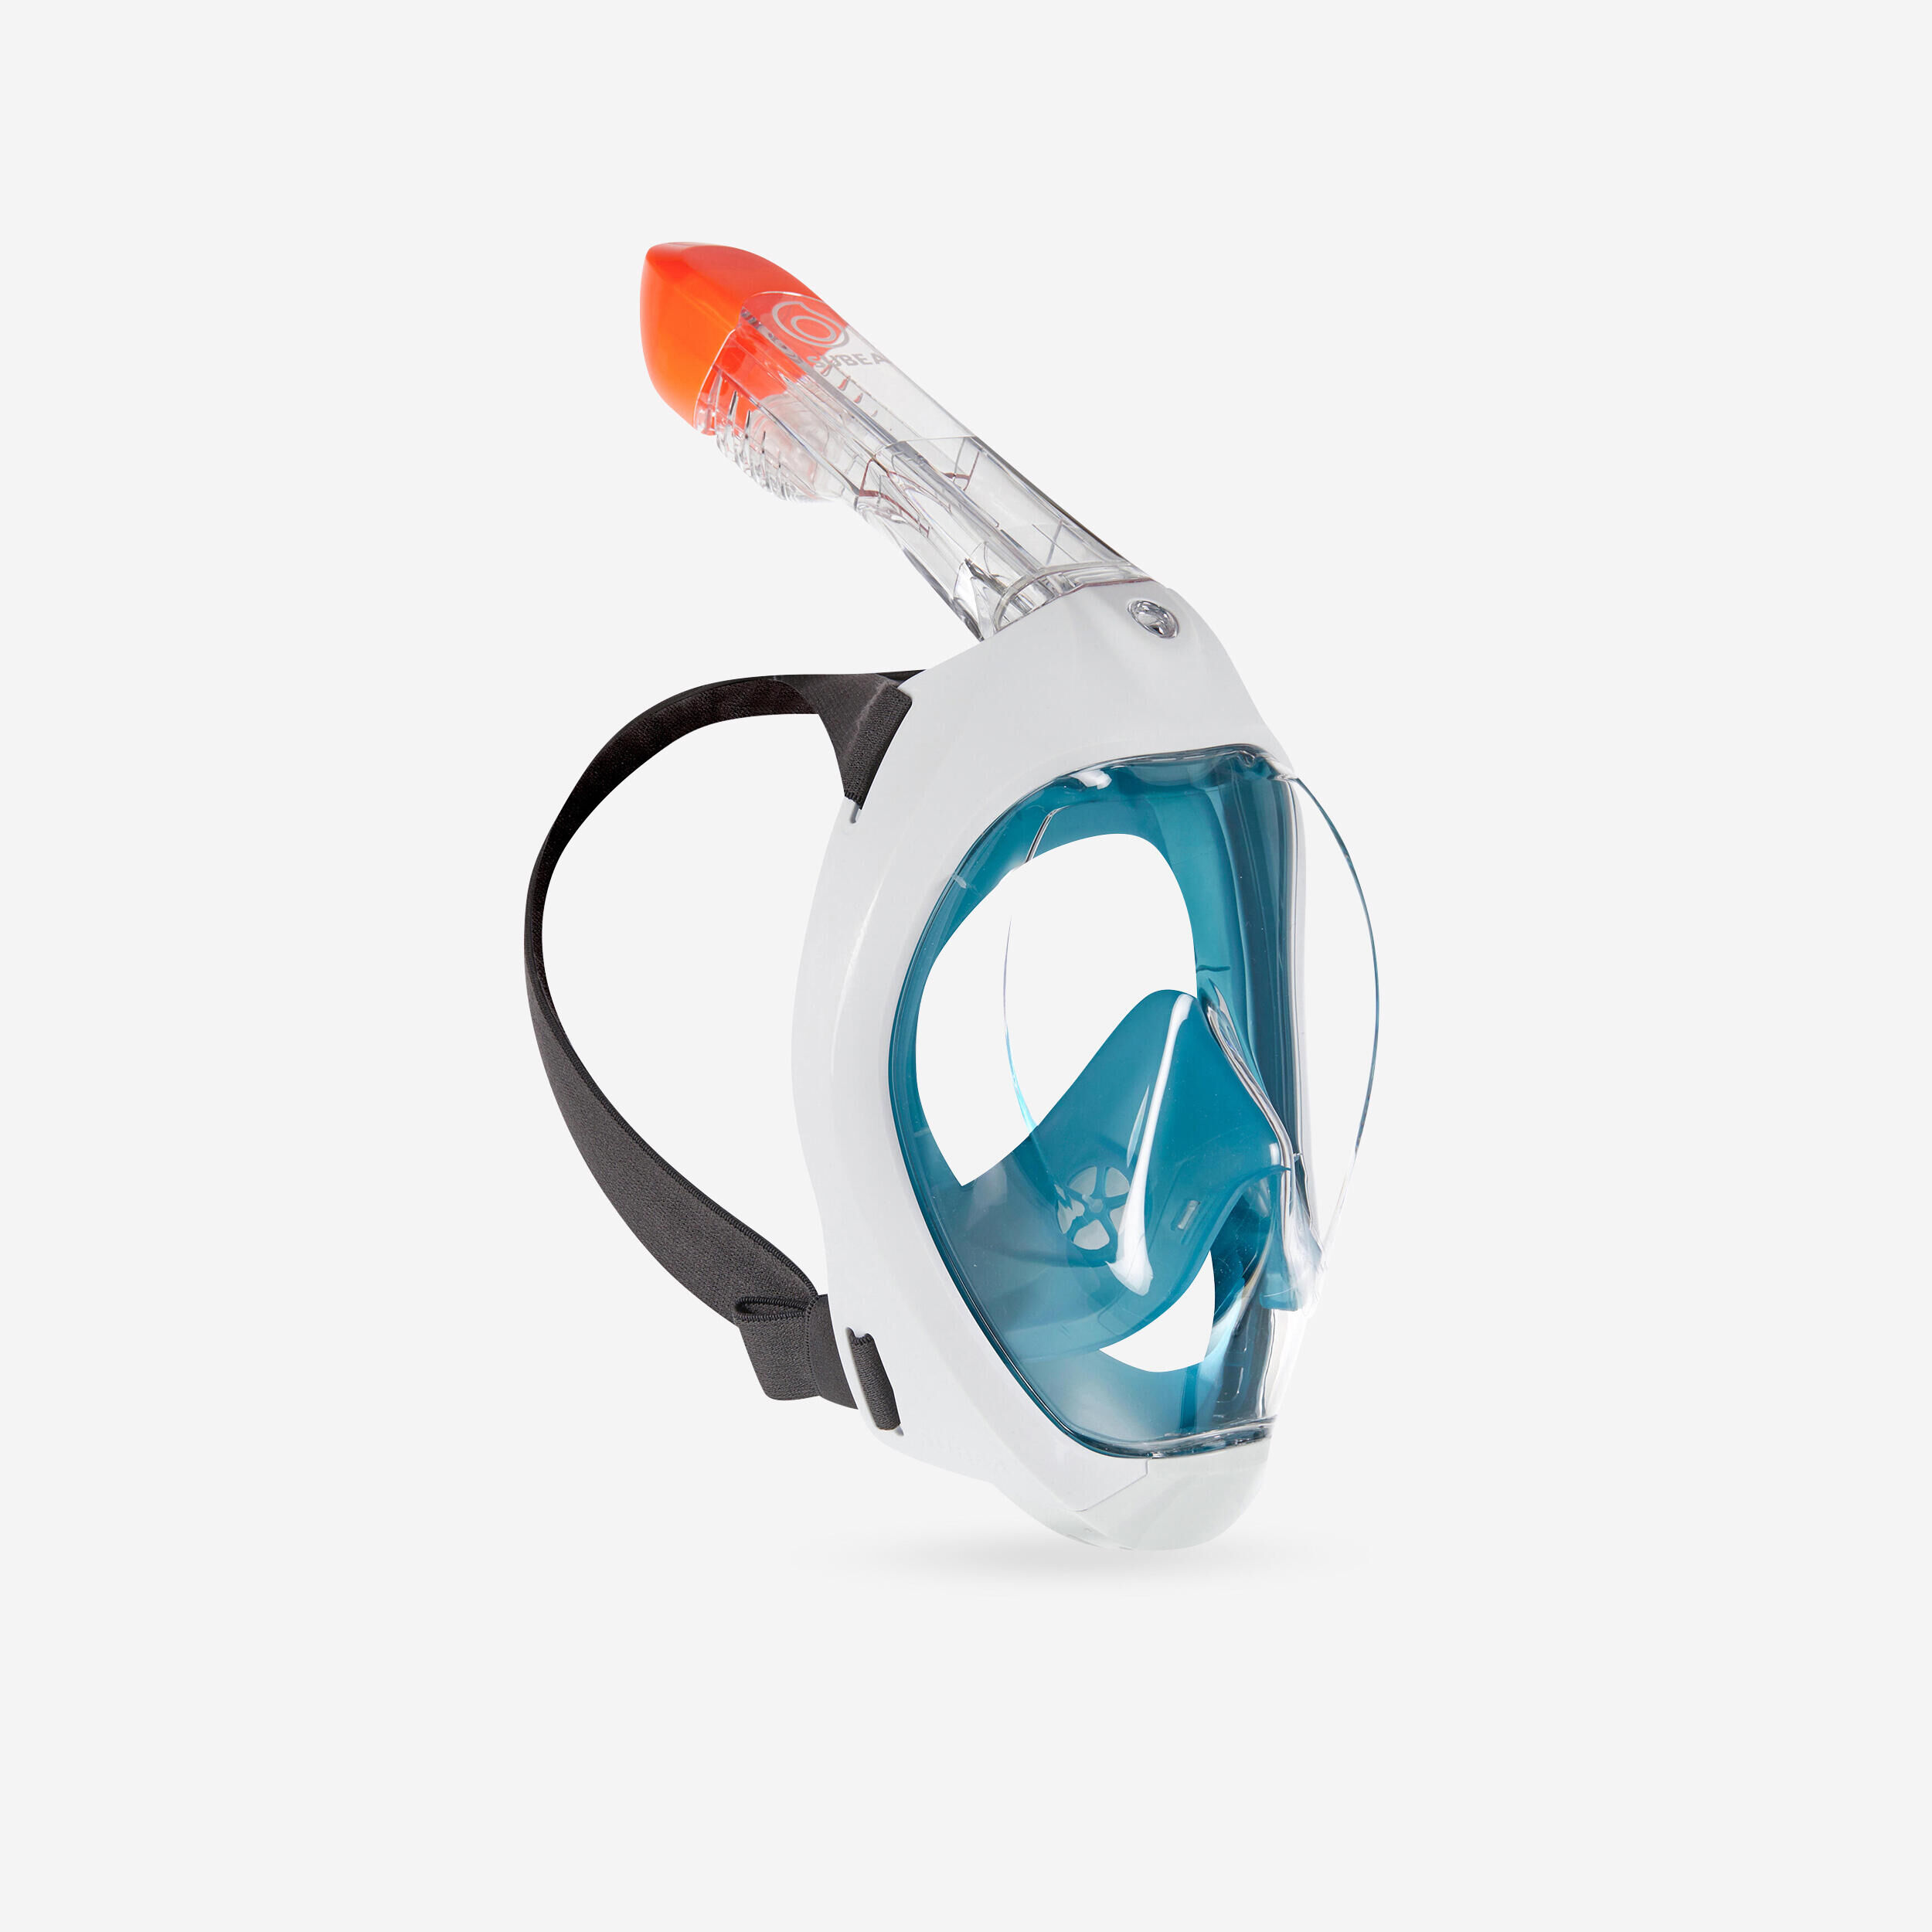 SUBEA Adult’s Easybreath Surface Mask - 500 Blue with bag